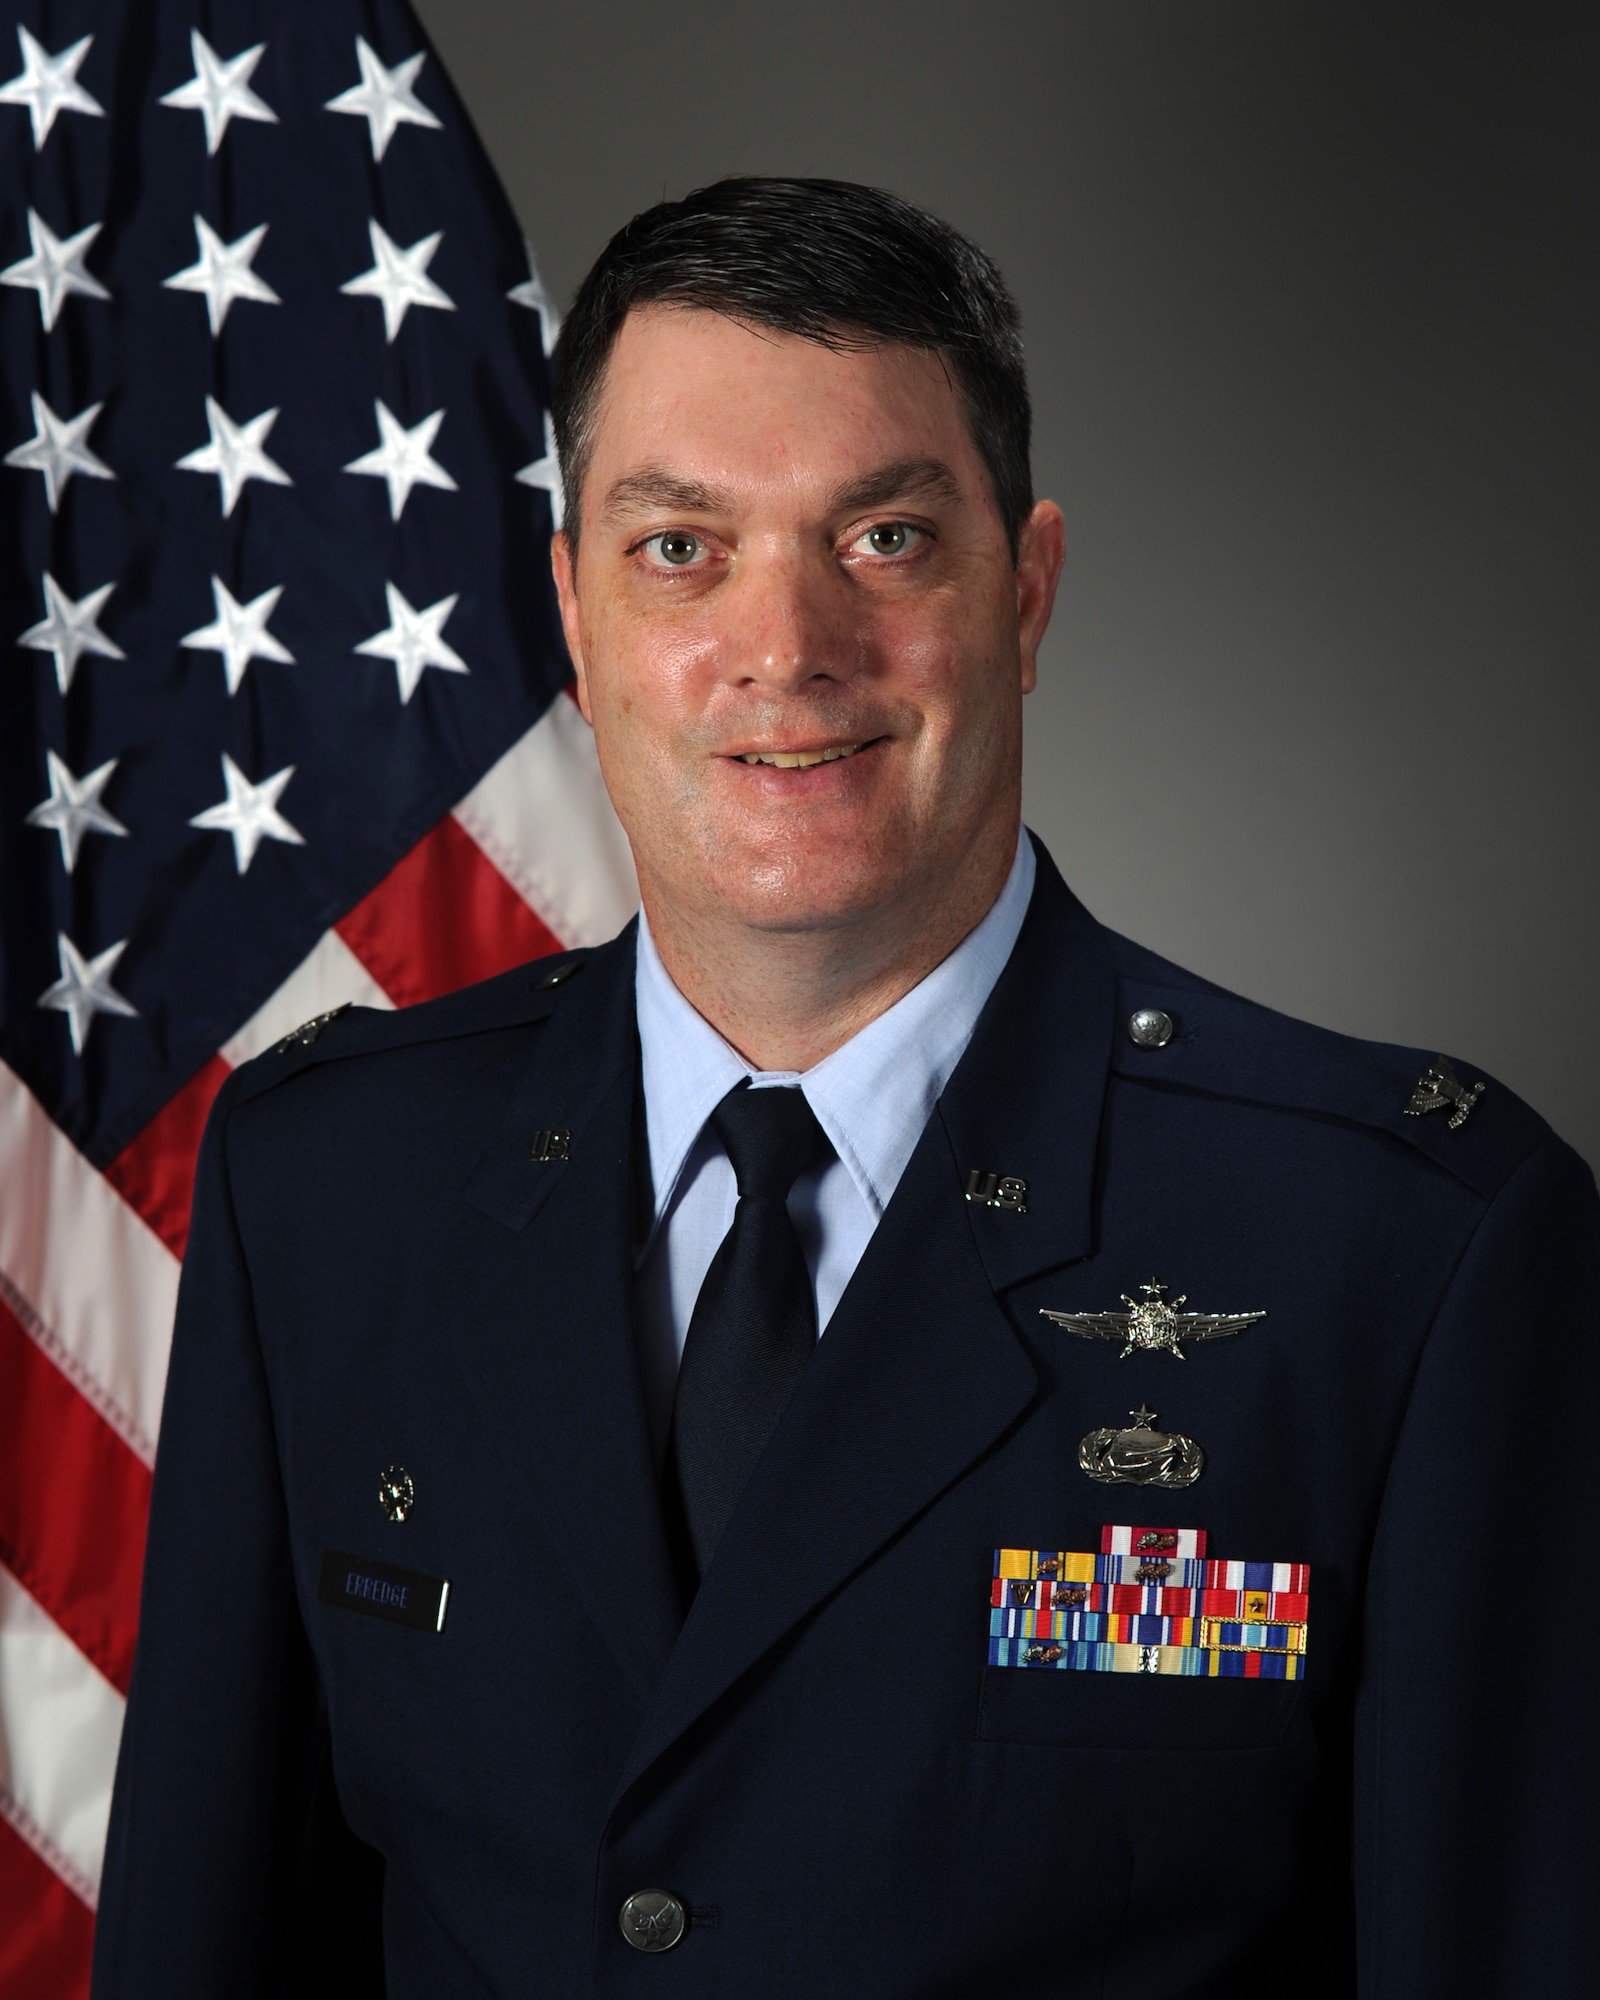 Col. Richard Erredge, 960th Cyberspace Wing commander, stands for an official photograph Aug. 18, 2020, at Joint Base San Antonio-Lackland, Texas. (U.S. Air Force courtesy photo)